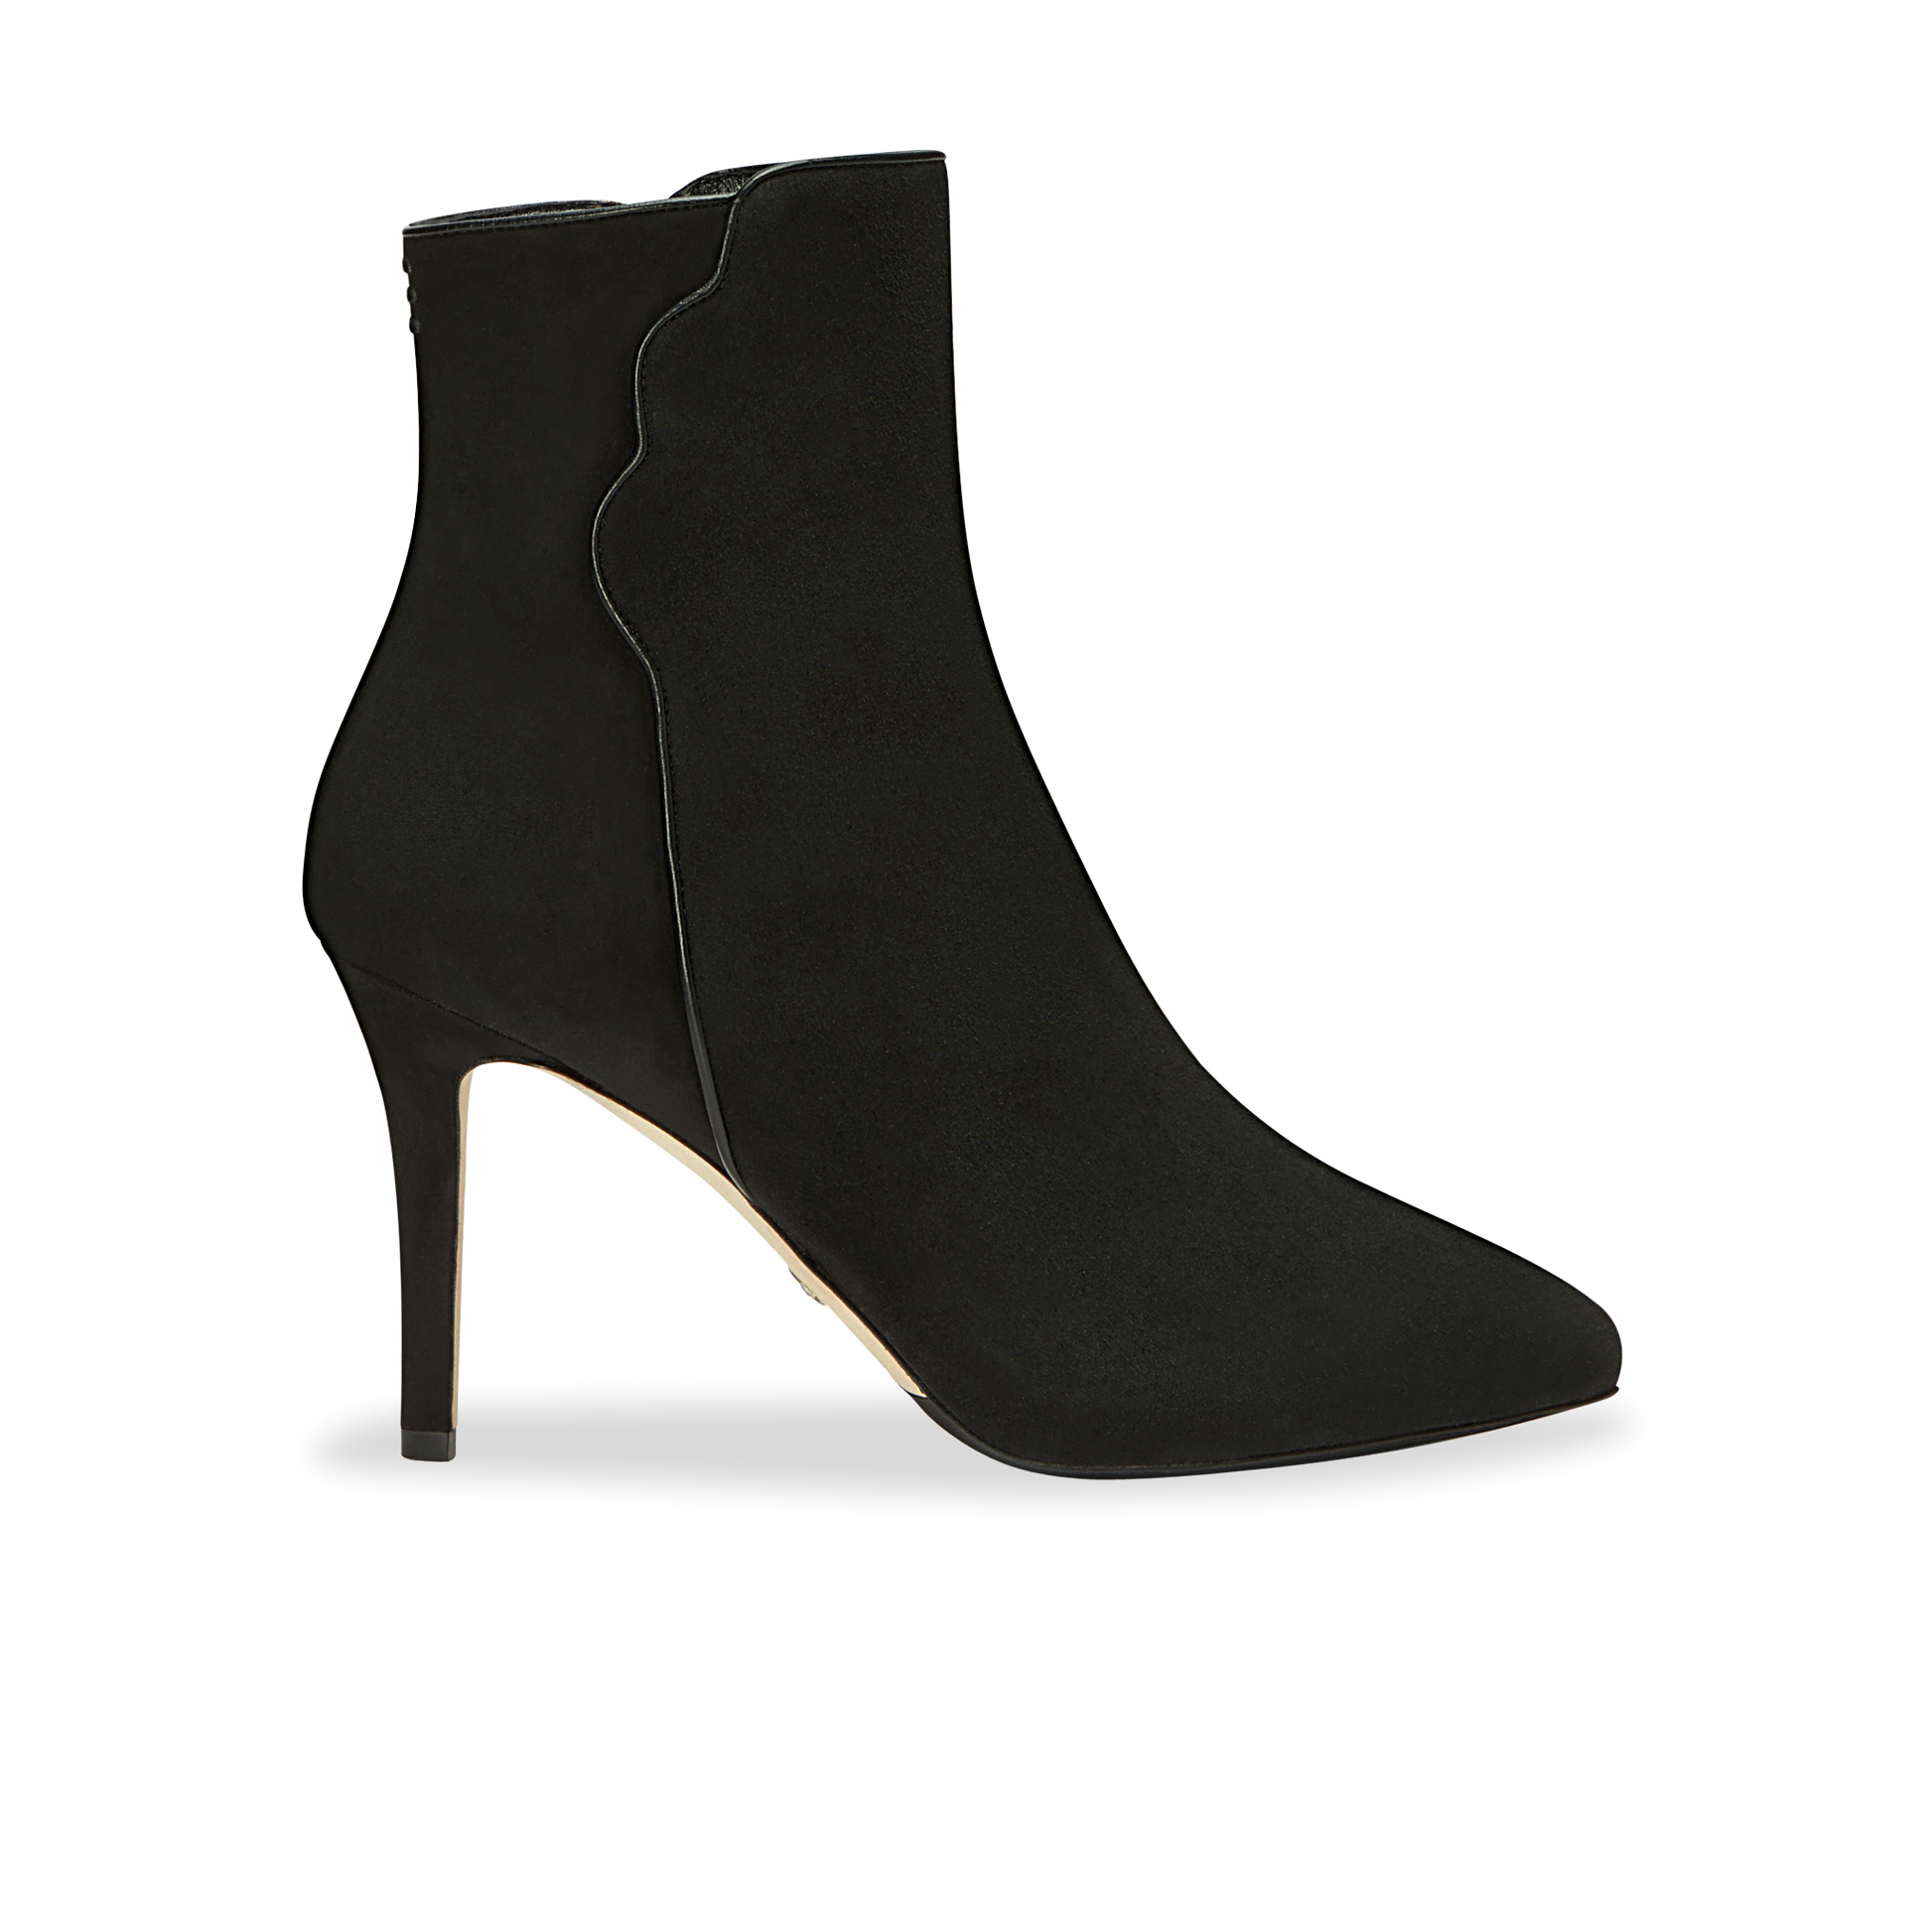 90mm Pointed Toe Perfect Dress Bootie Black Suede 